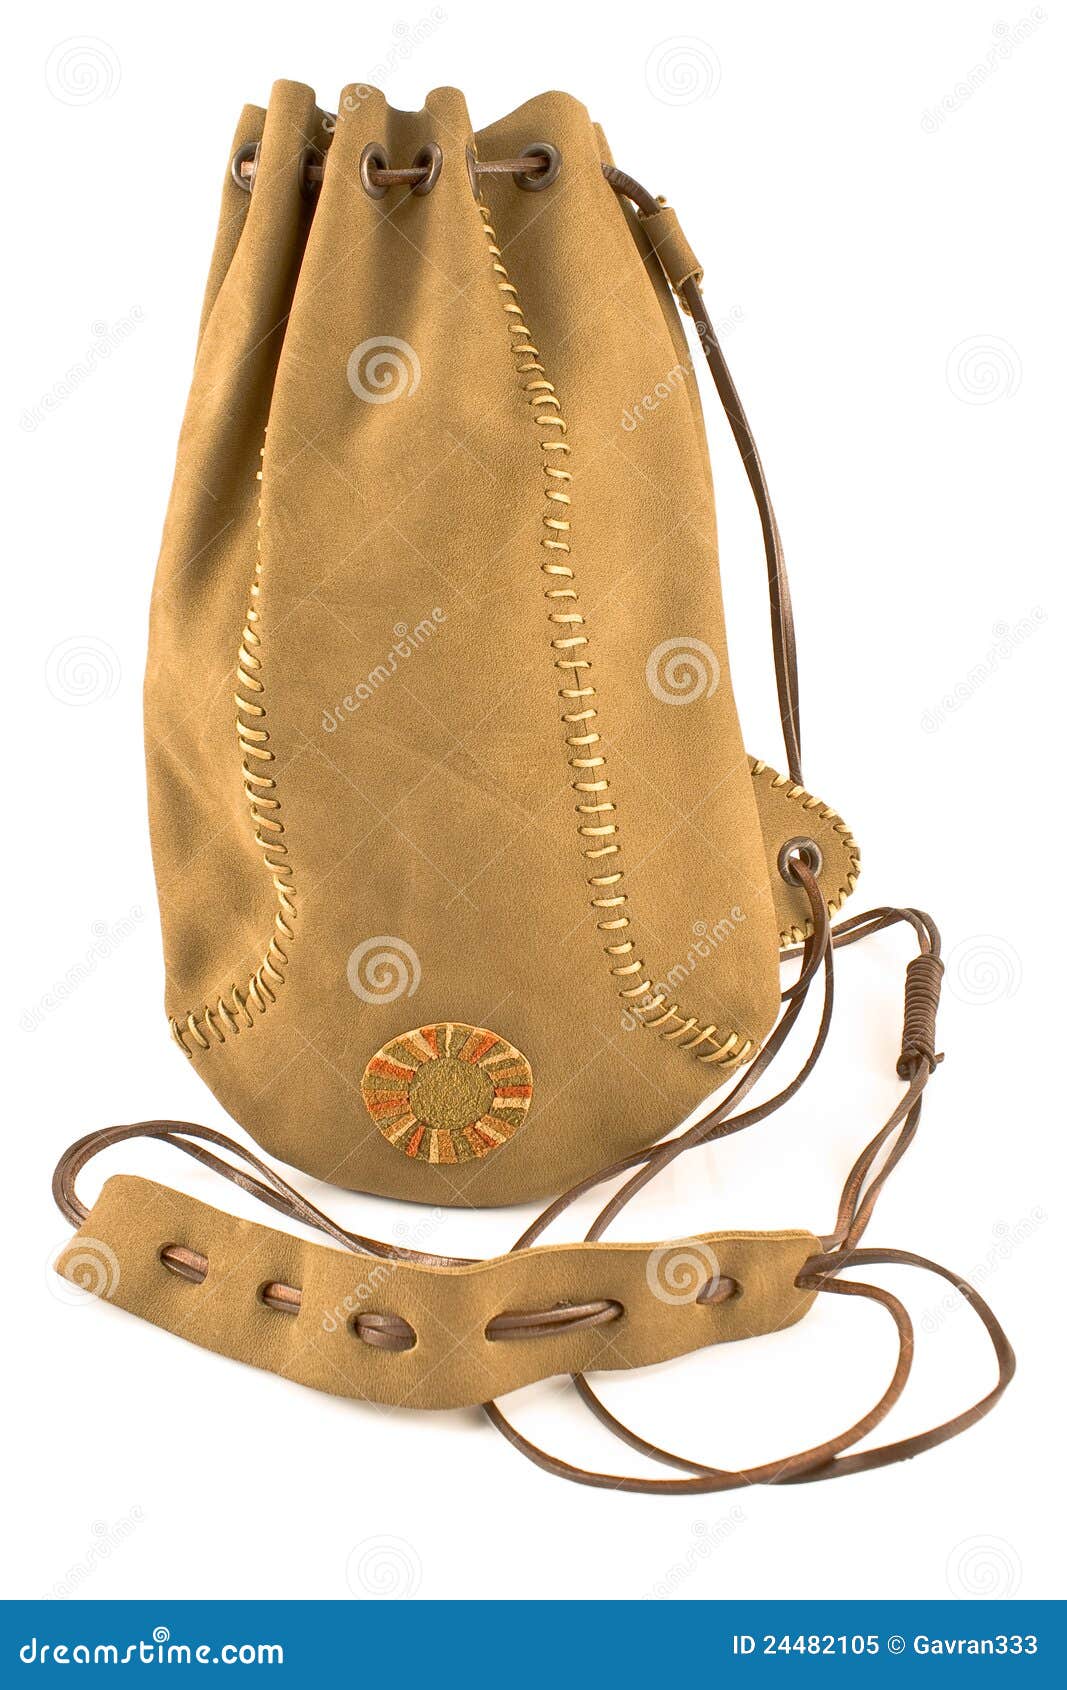 Leather Pouch Bag Tied With Leather String Stock Image - Image of baggage, seam: 24482105